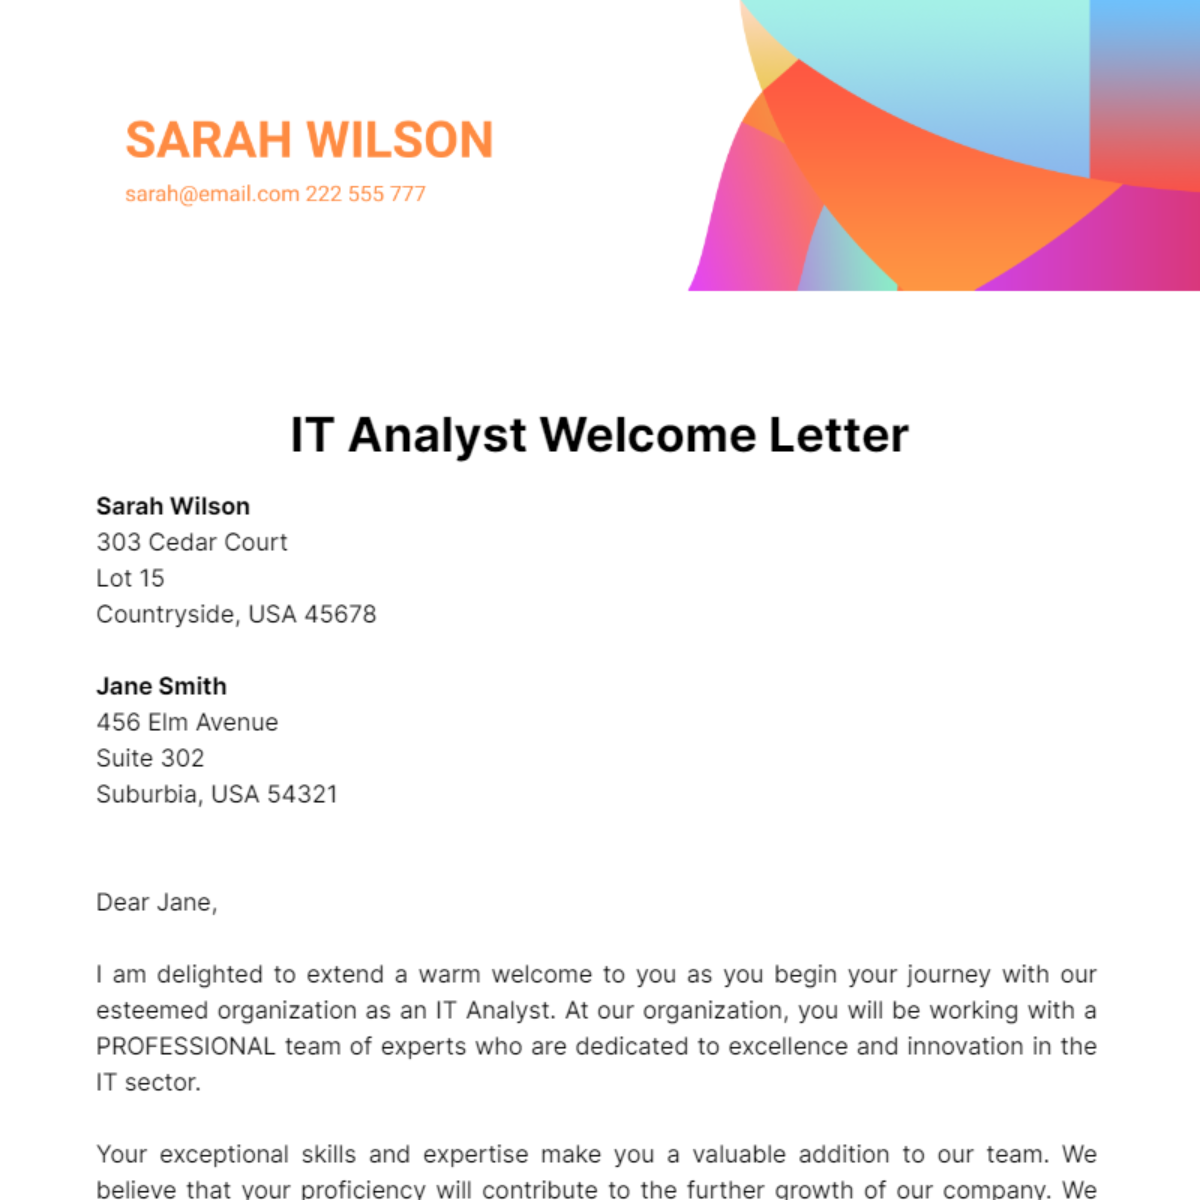 IT Analyst Welcome Letter Template